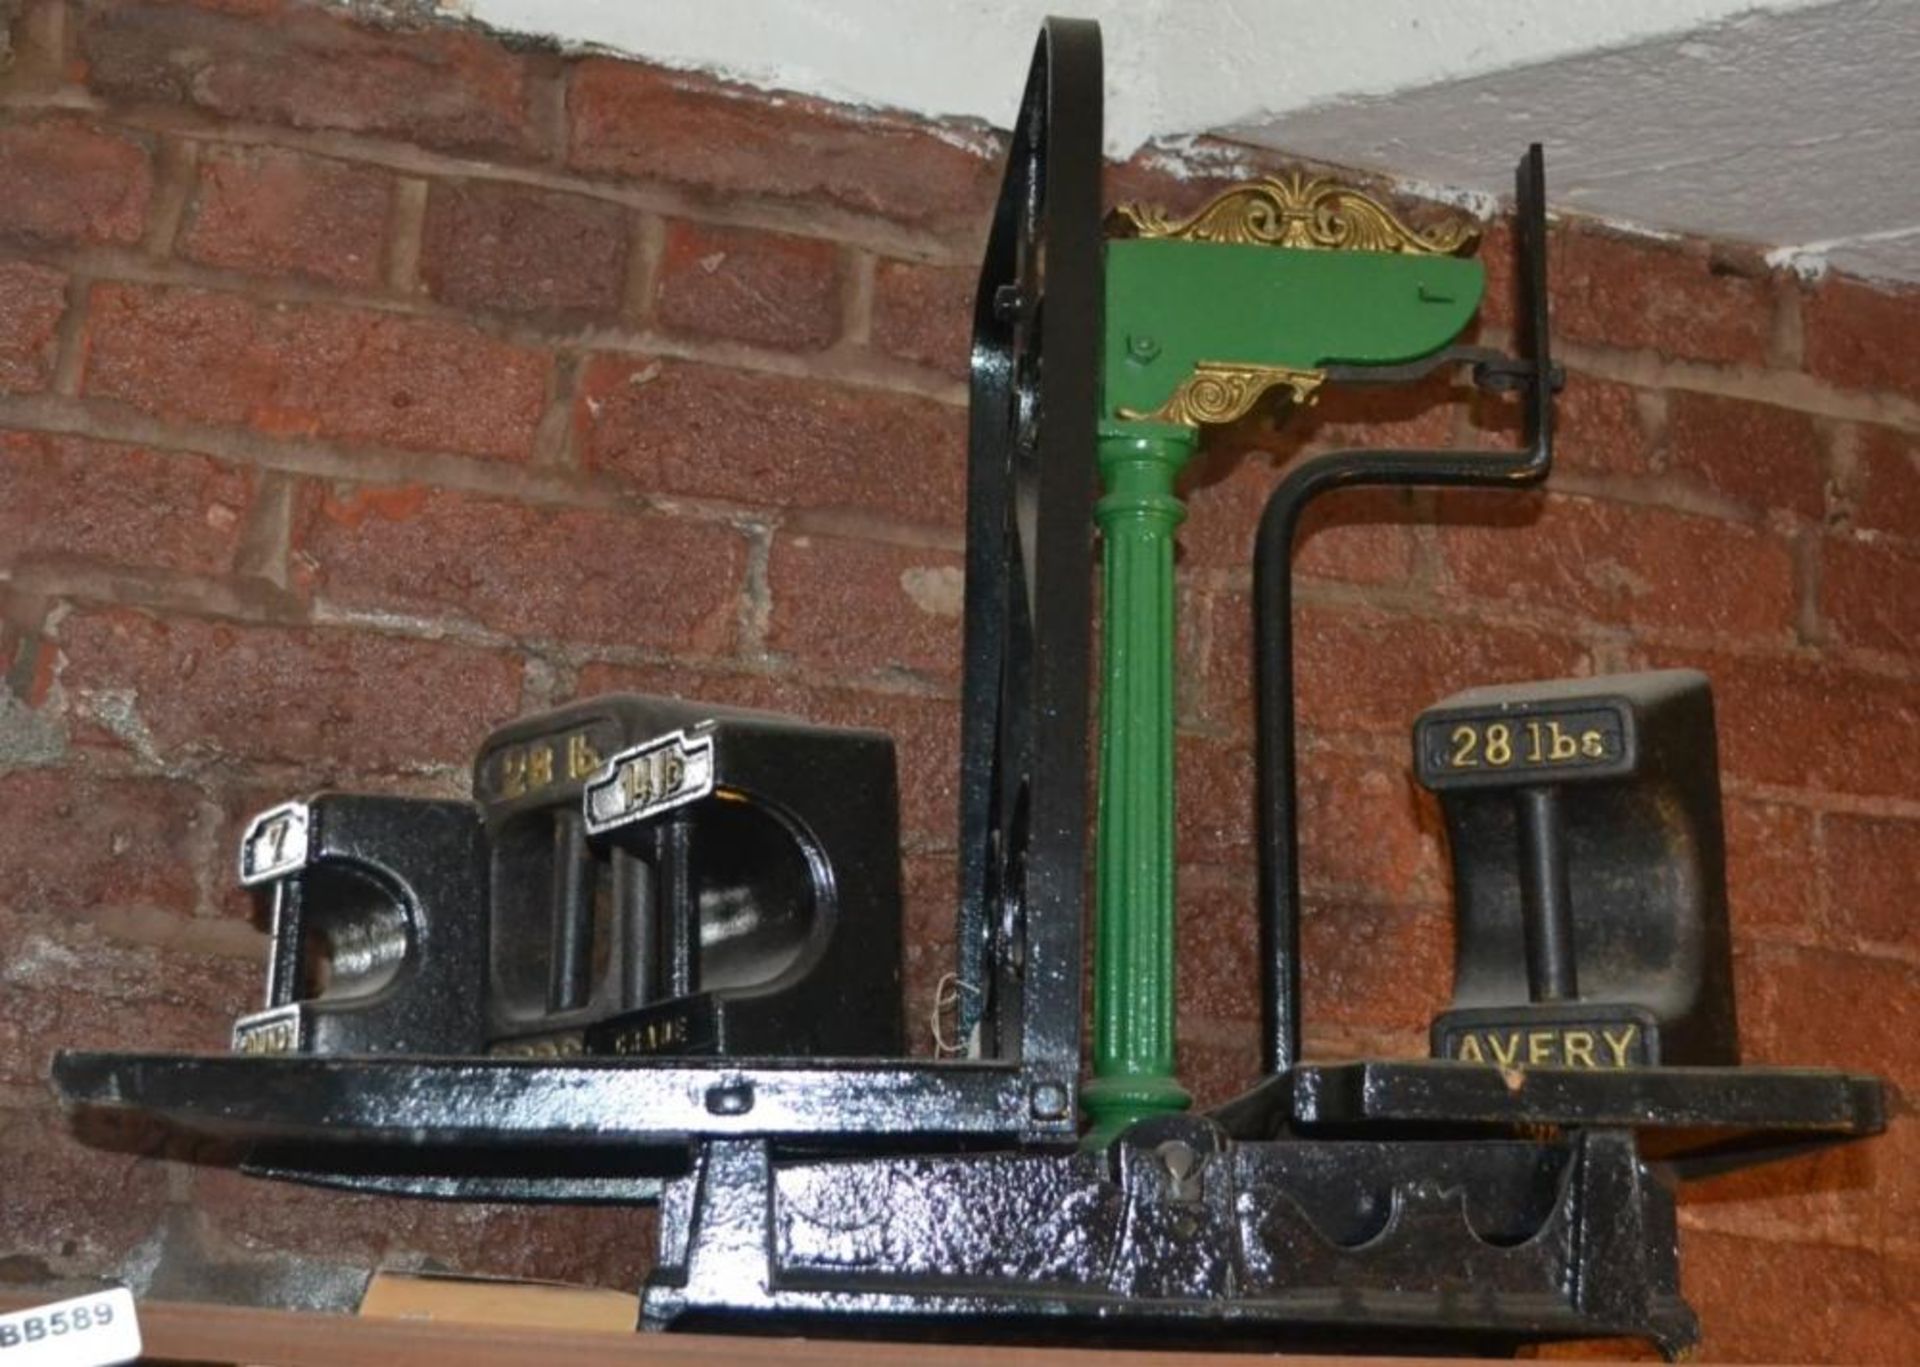 1 x Set of Vintage Avery Weighing Scales With Various Large Weights - H54 x W70 x D44 cms - Ref BB58 - Image 7 of 7